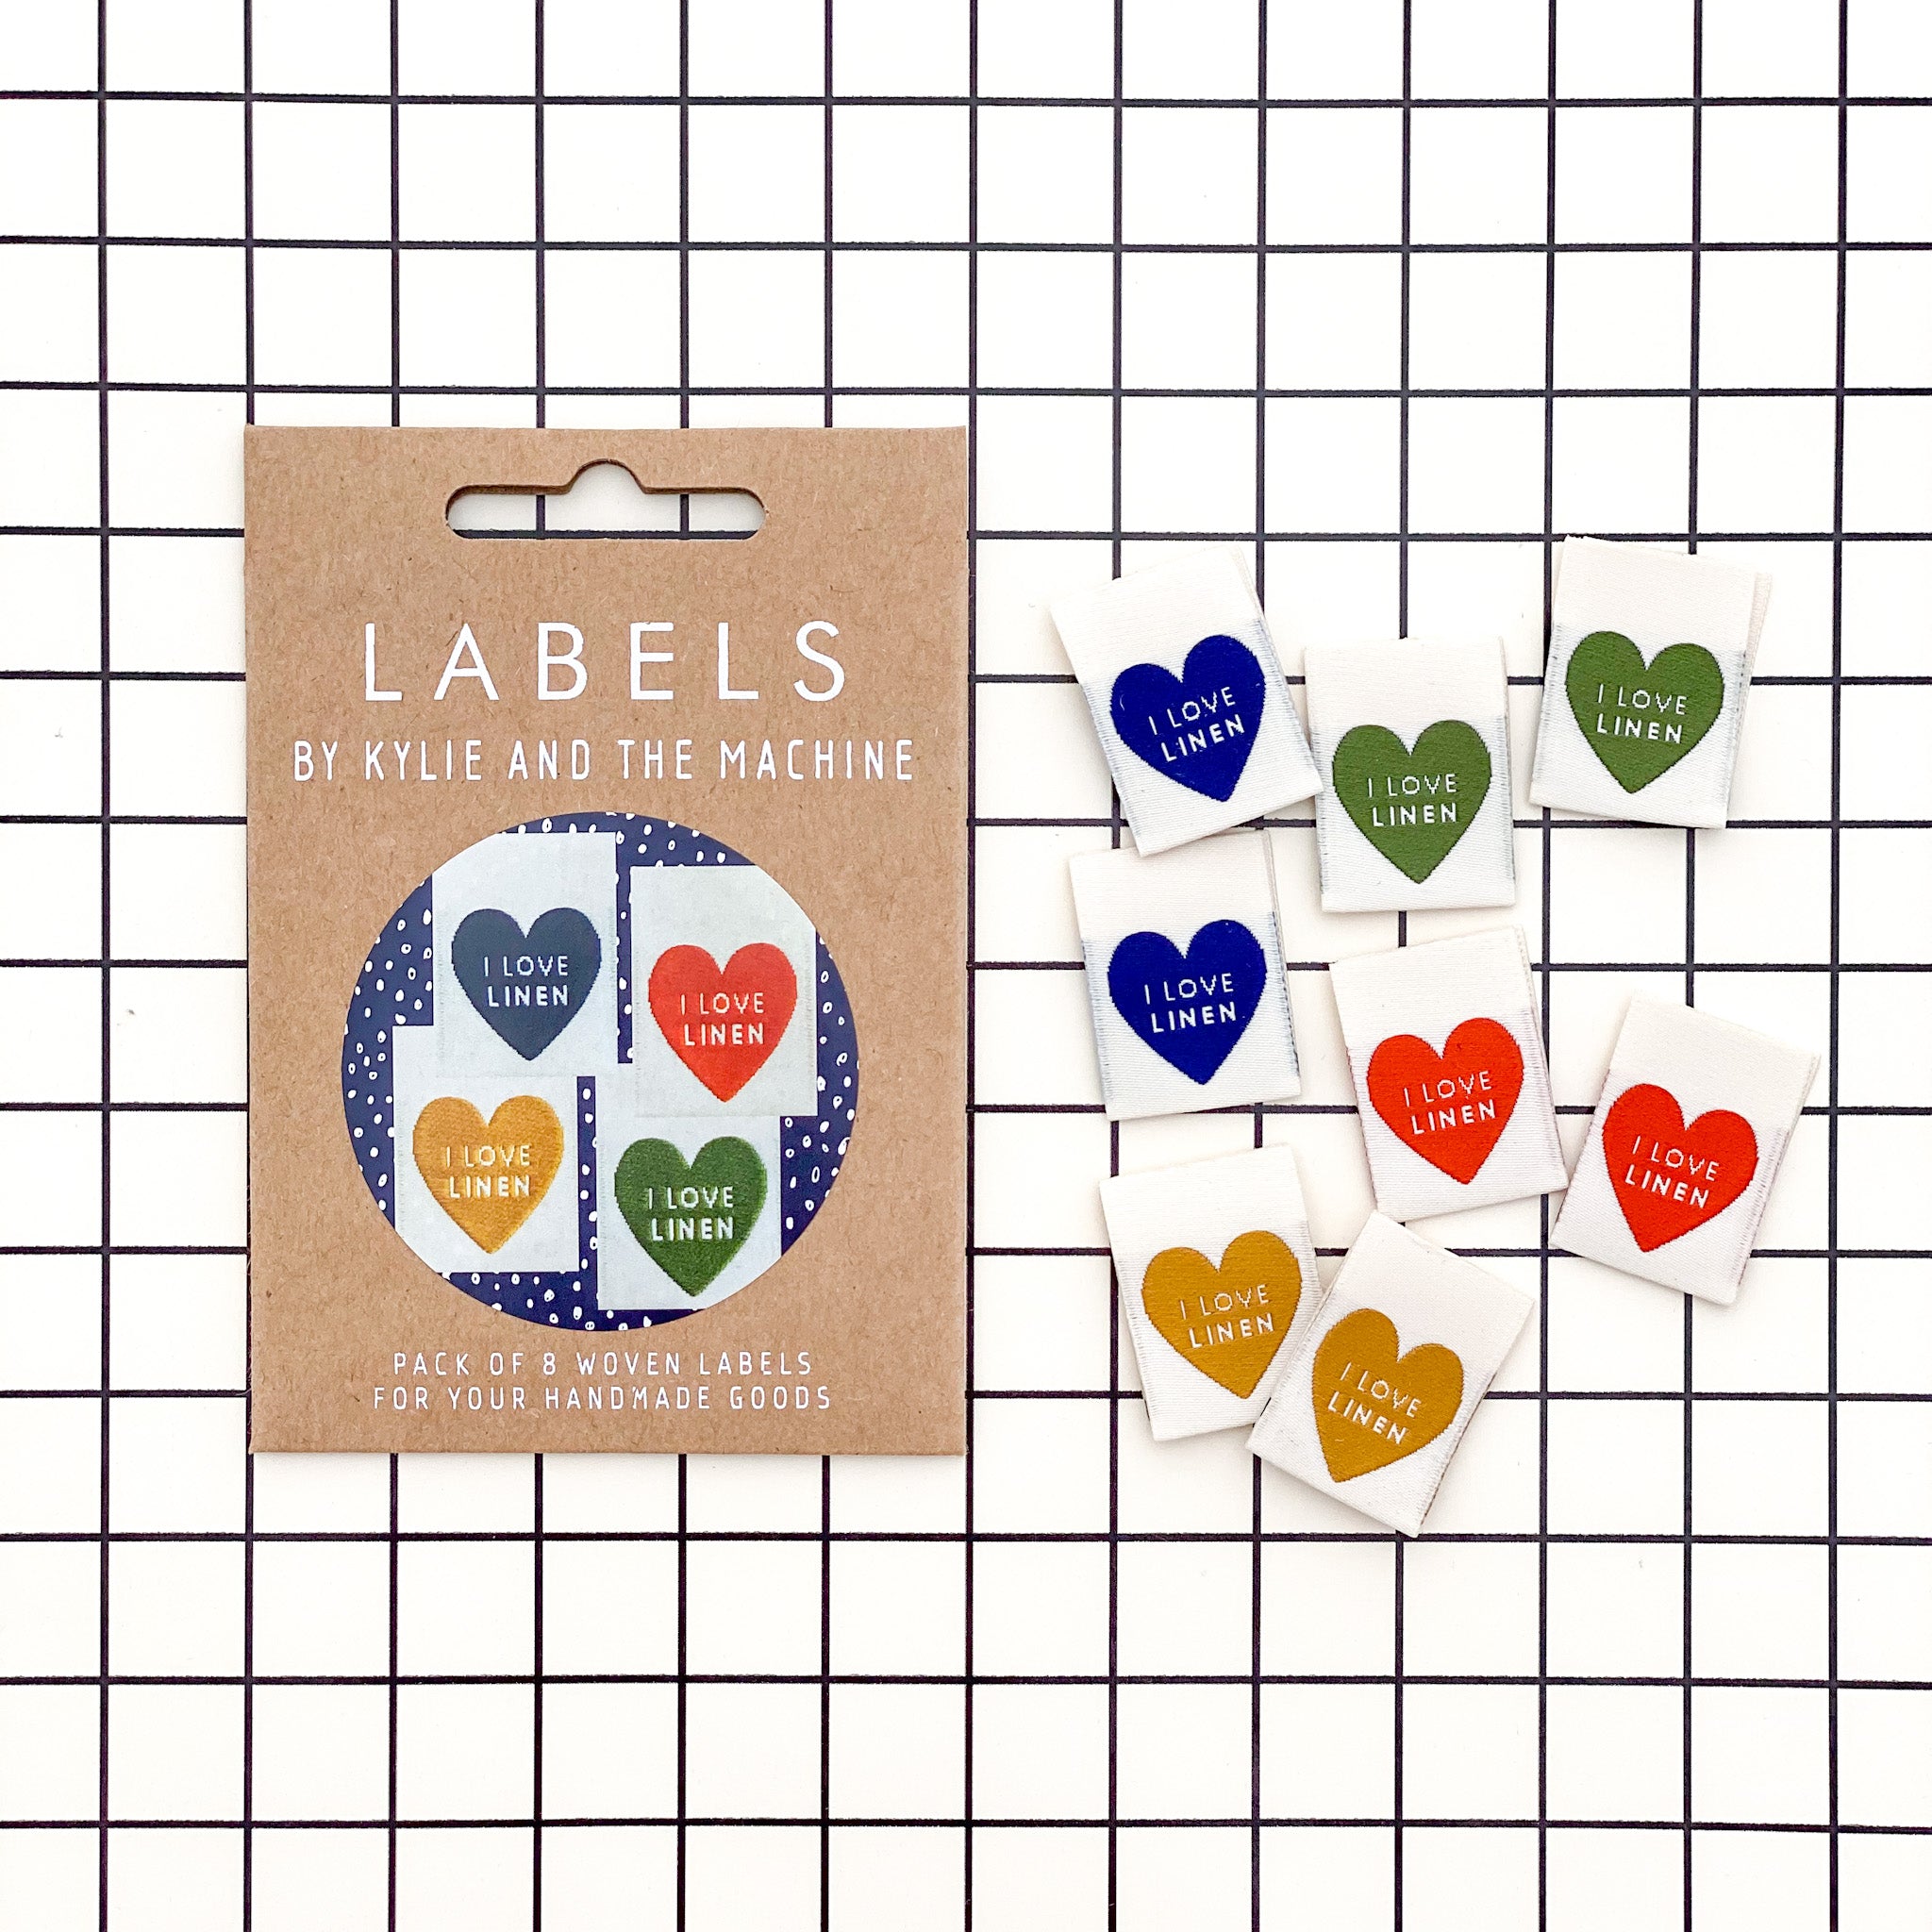 Kylie and the Machine -"I LOVE LINEN" Multipack Woven Labels 8 Pack